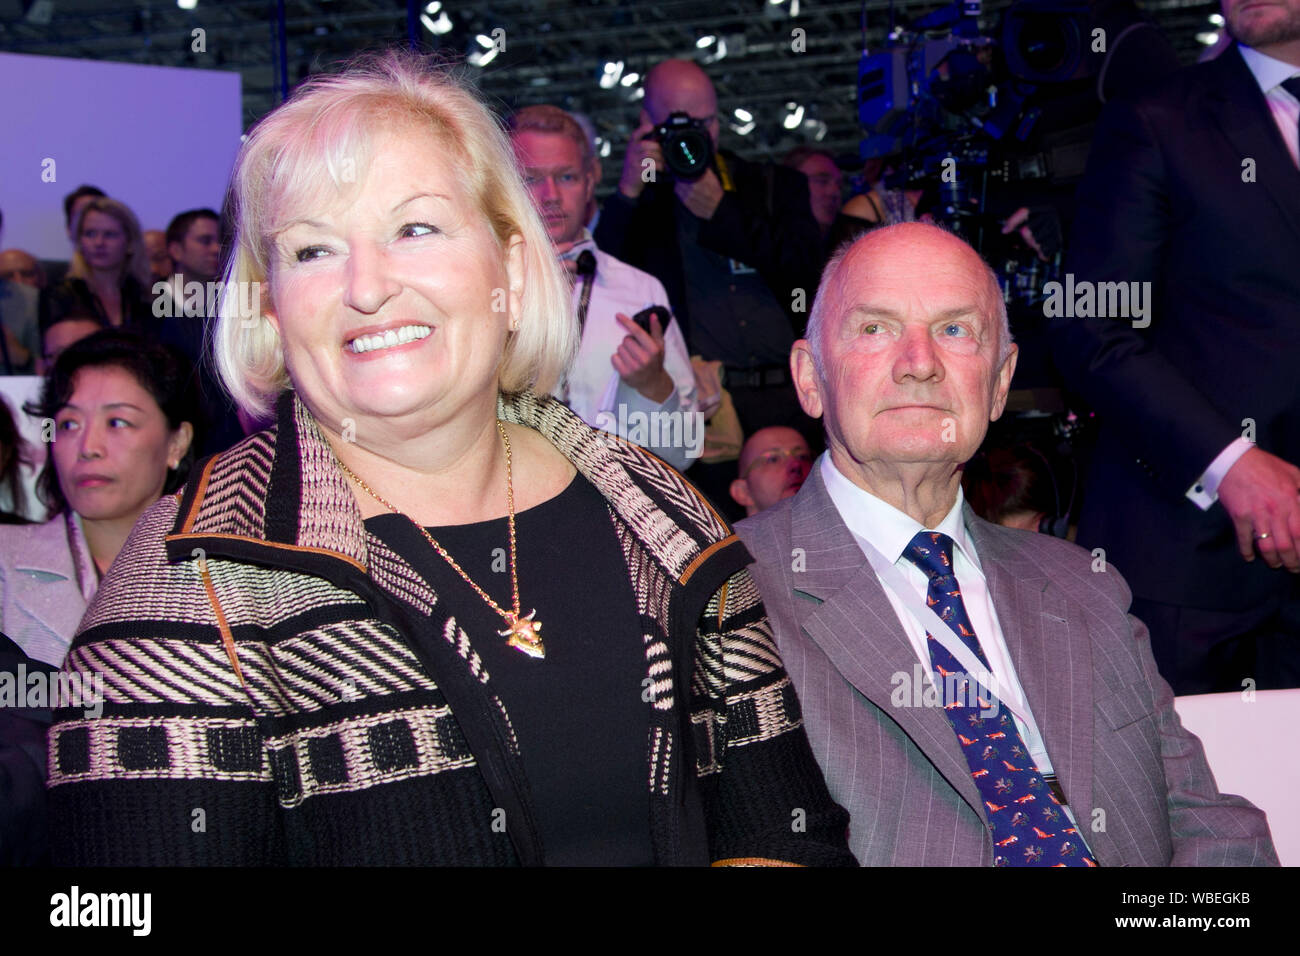 Frankfurt, Deutschland. 27th Aug, 2019. Ferdinand PIECH died at the age of 82 years. Archive photo: Dr Ferdinand PIECH, Chairman of the Supervisory Board of Volkswagen AG, with wife Ursula, International Motor Show IAA 2013 in Frankfurt, 10.09.2013. å | usage worldwide Credit: dpa/Alamy Live News Stock Photo